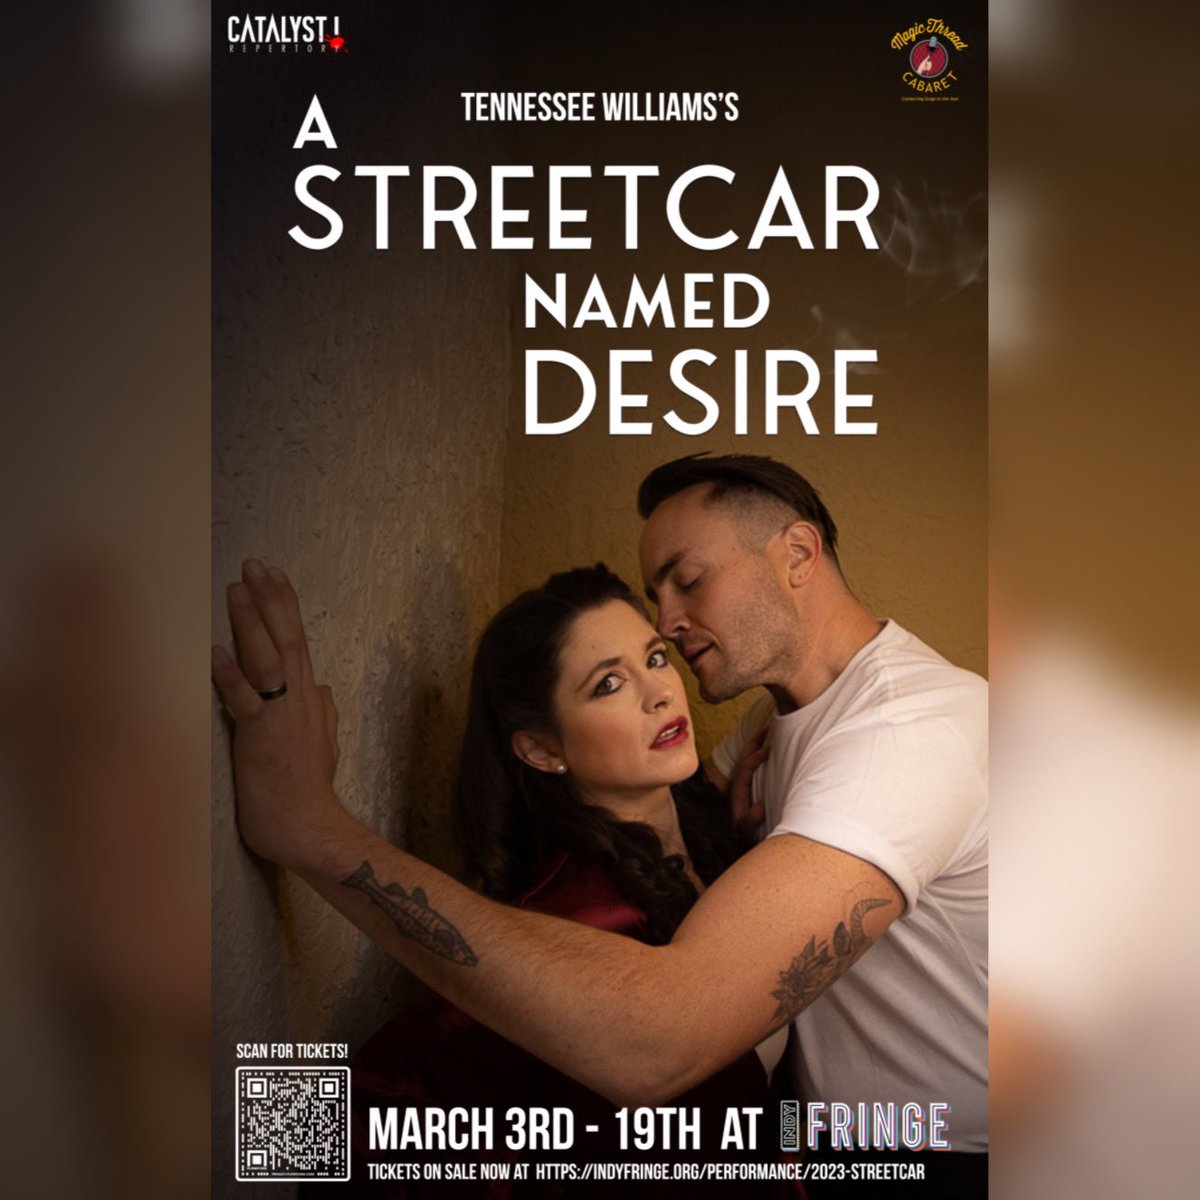 I’m excited to announce I’ve been casted in my first play in over a decade. I’m returning to the stage as a performer. Come out to see the show, if you can. 🎶✨🎭#singing #acting #tennesseewilliams #astreetcarnameddesire #theater #performing #indyfringe